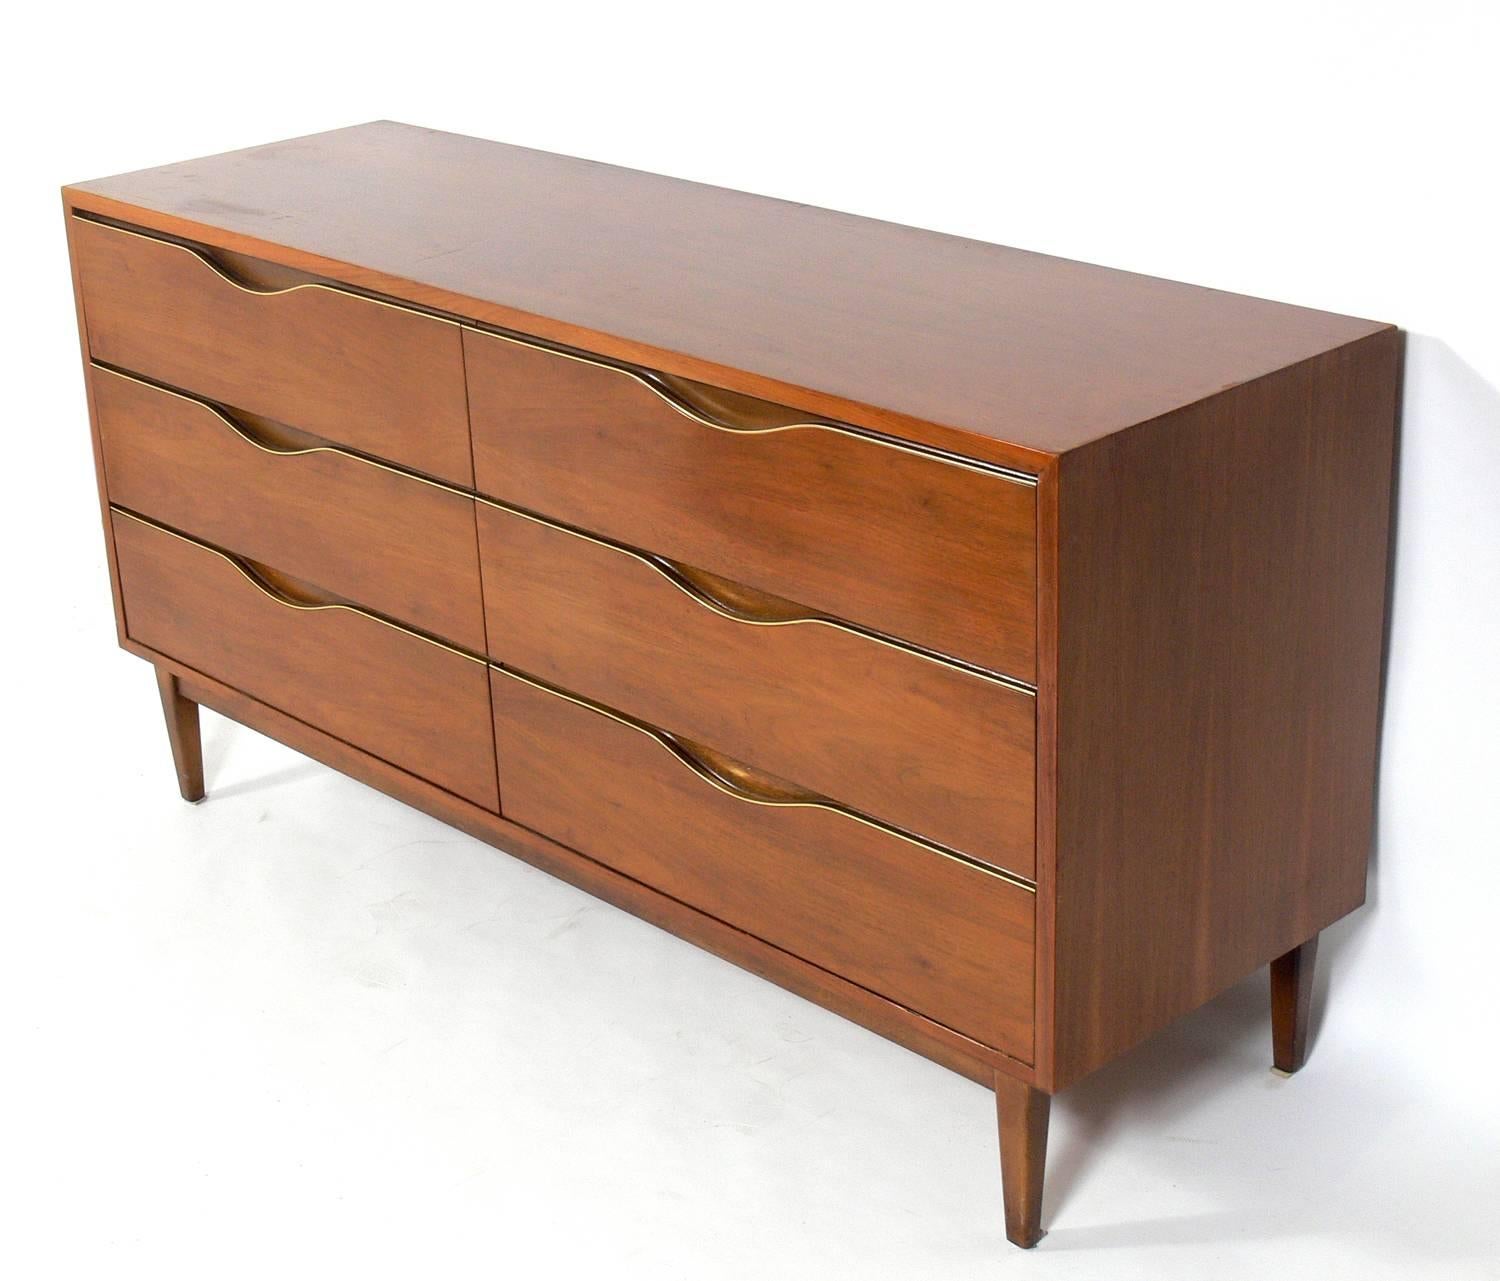 Midcentury Walnut Chest or Dresser with Brass Trim, American, circa 1960s. This chest is currently being refinished and can be completed in your choice of color, including the walnut color currently seen, or an ultra dark brown as seen in the last